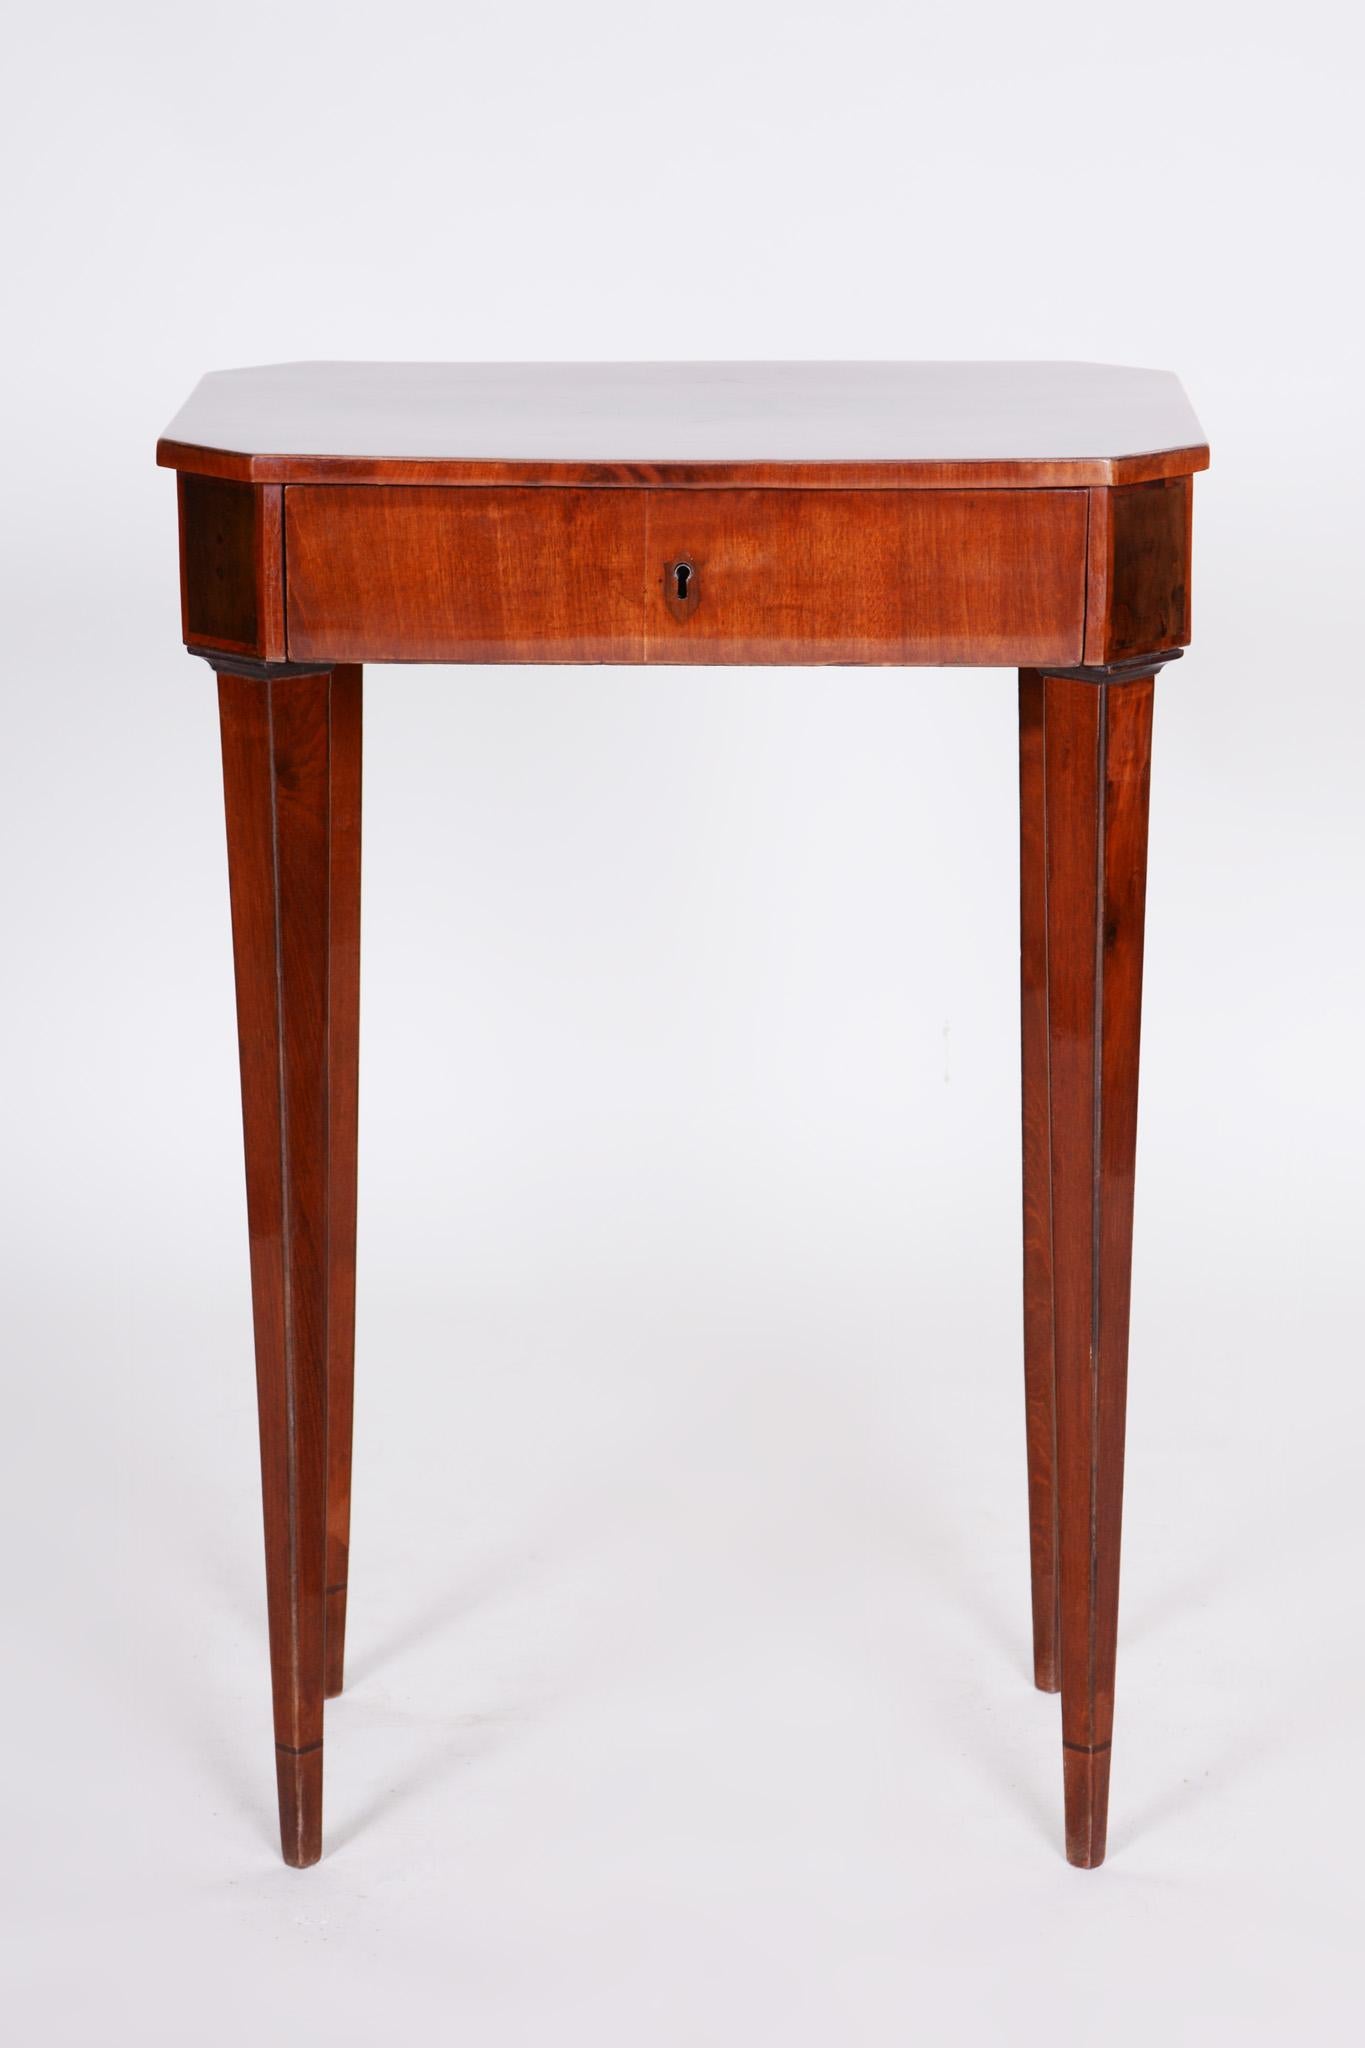 Shipping to any US port only for $290 USD

Austrian Empire small table
Period: 1810-1819
Material: Mahogany
Shellac polished.

We guarantee safe a the cheapest air transport from Europe to the whole world within 7 days.
The price is the same as for